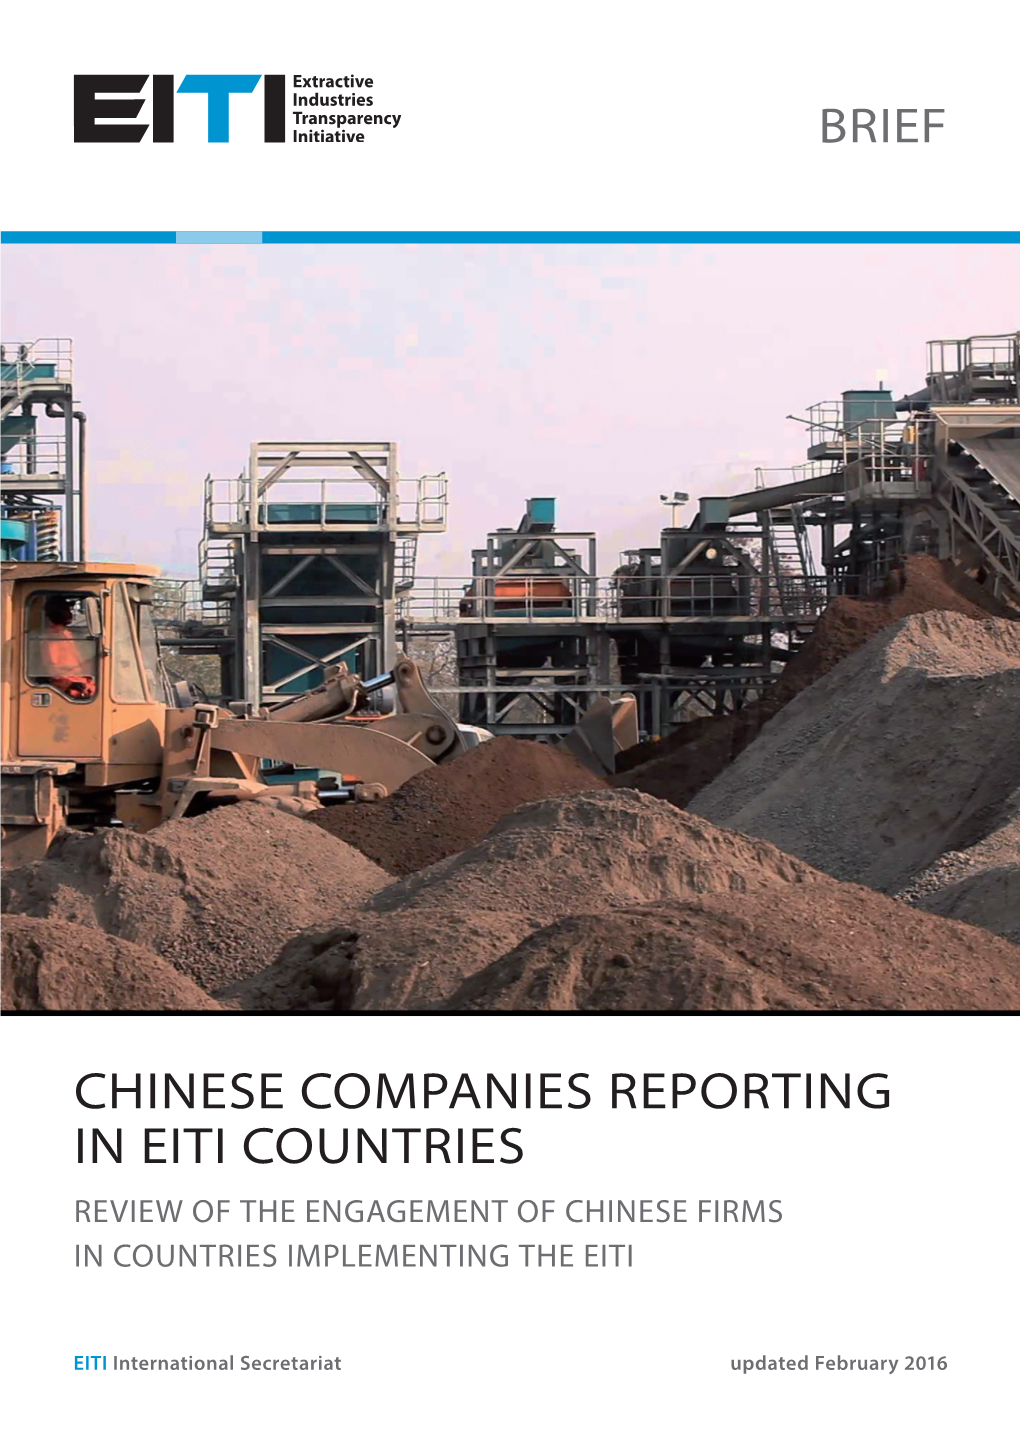 Chinese Companies Reporting in Eiti Countries Review of the Engagement of Chinese Firms in Countries Implementing the Eiti